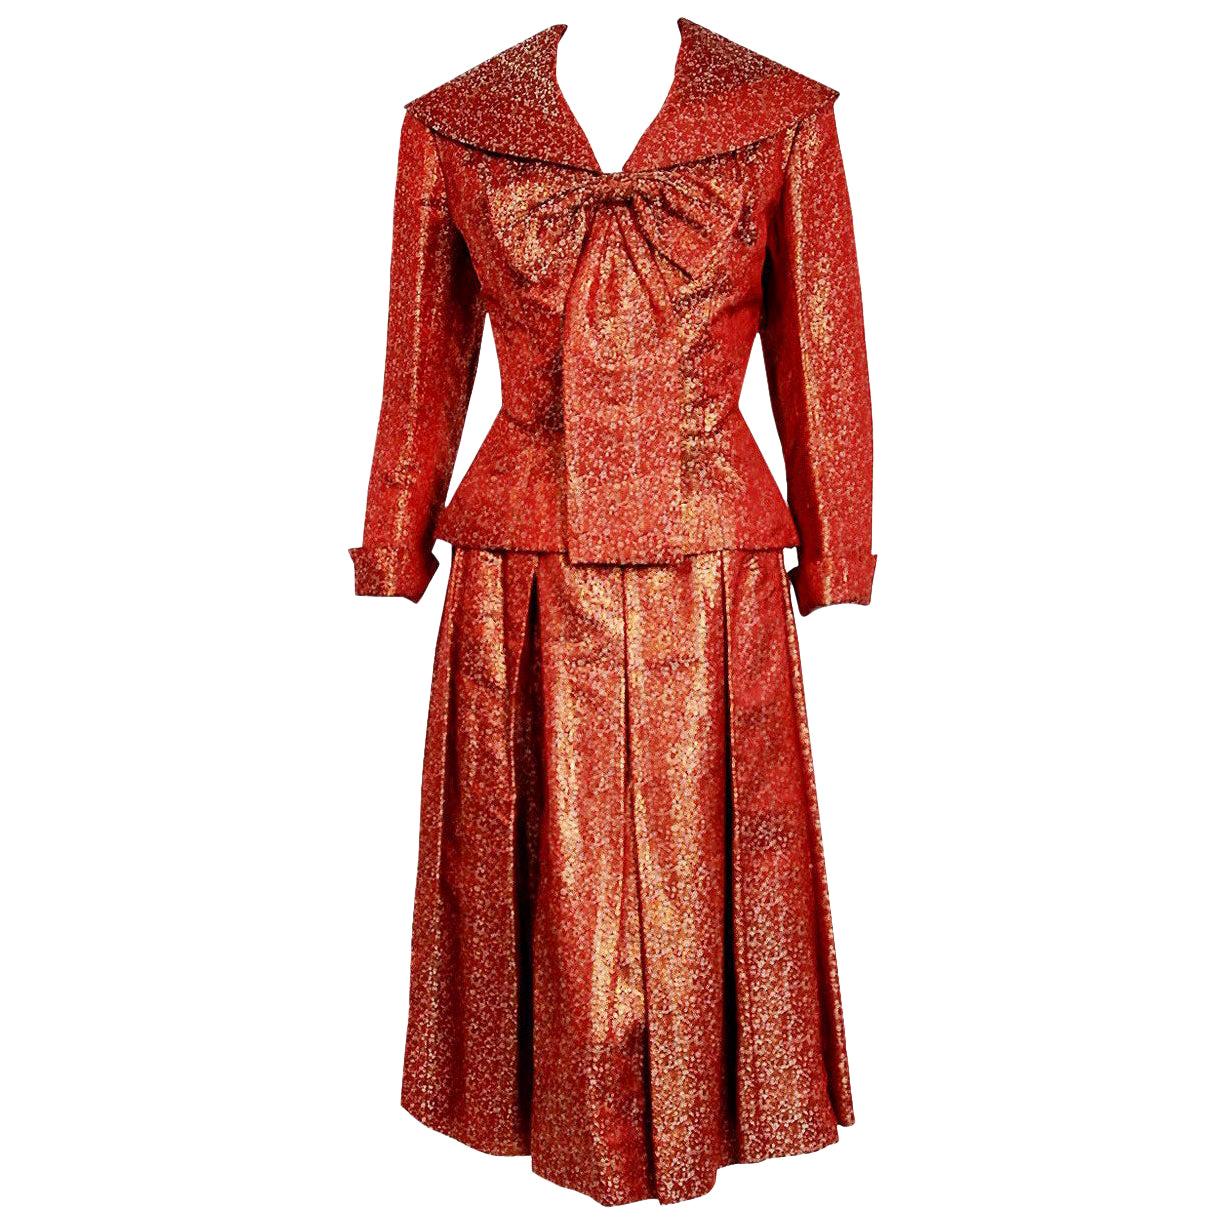 Vintage 1950's Egyptian Couture Metallic Burgundy Red Silk Brocade Dress Suit 